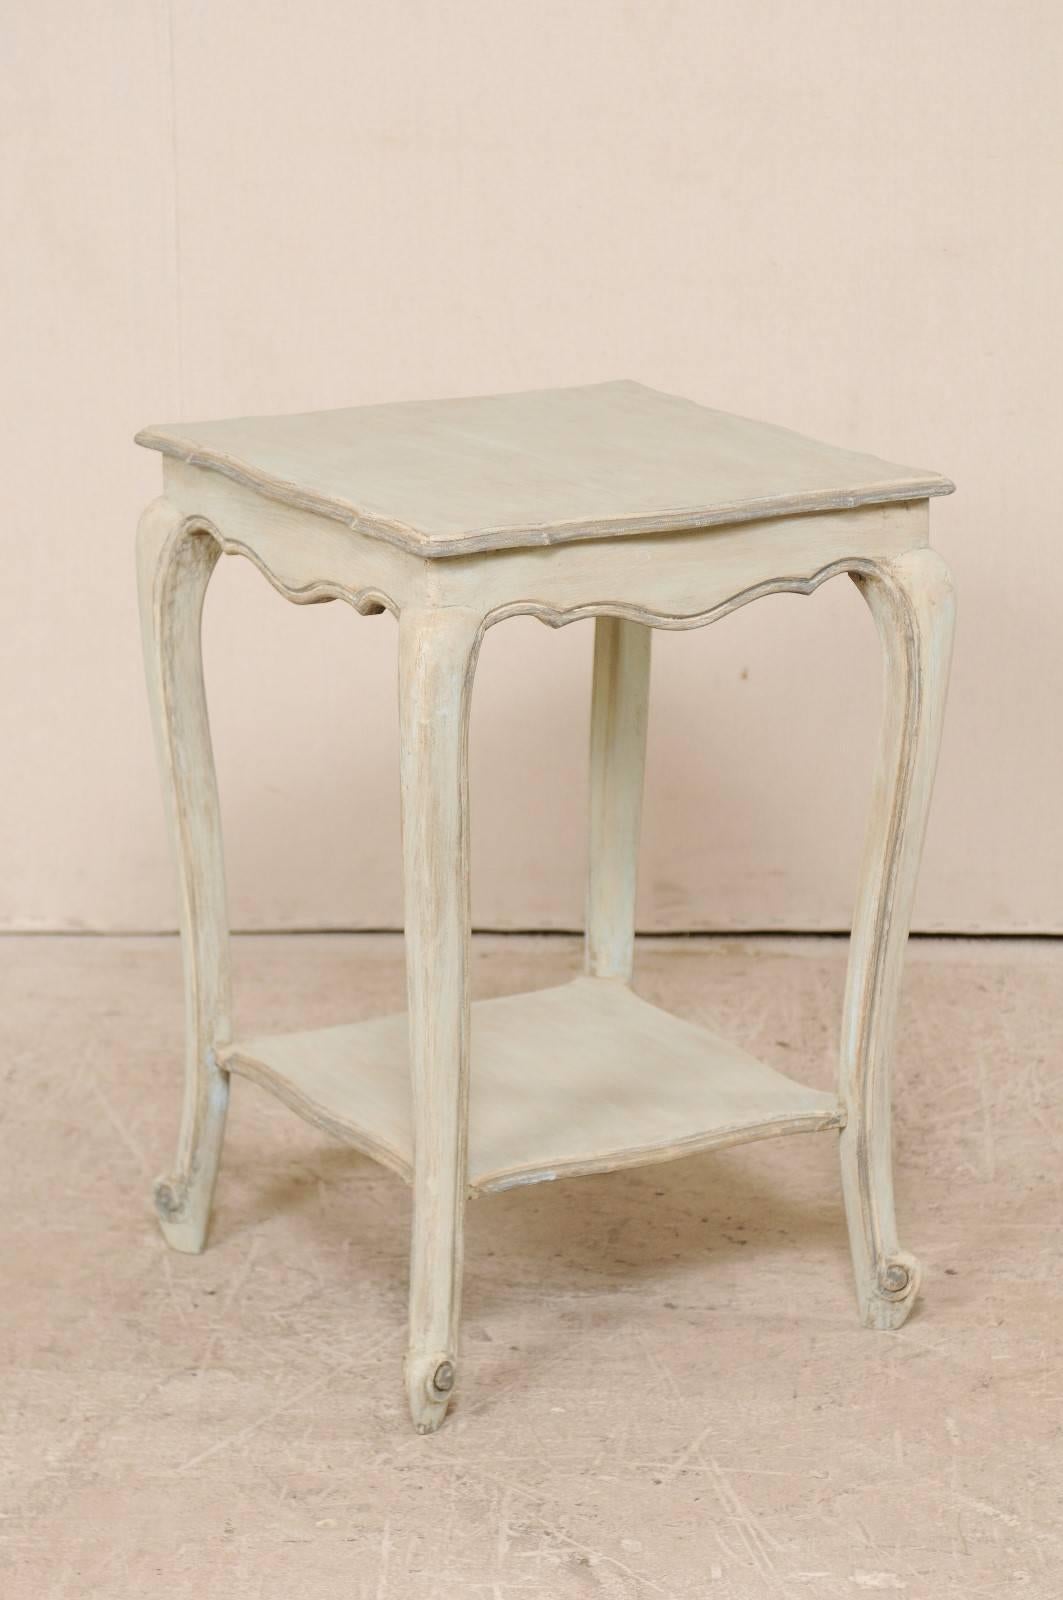 A French, early 20th century painted wood side table. This antique French end table features a square-shaped top with scalloped edges over a scalloped skirt. There is a lower shelf and four slender cabriole legs. This sweet little side table is a